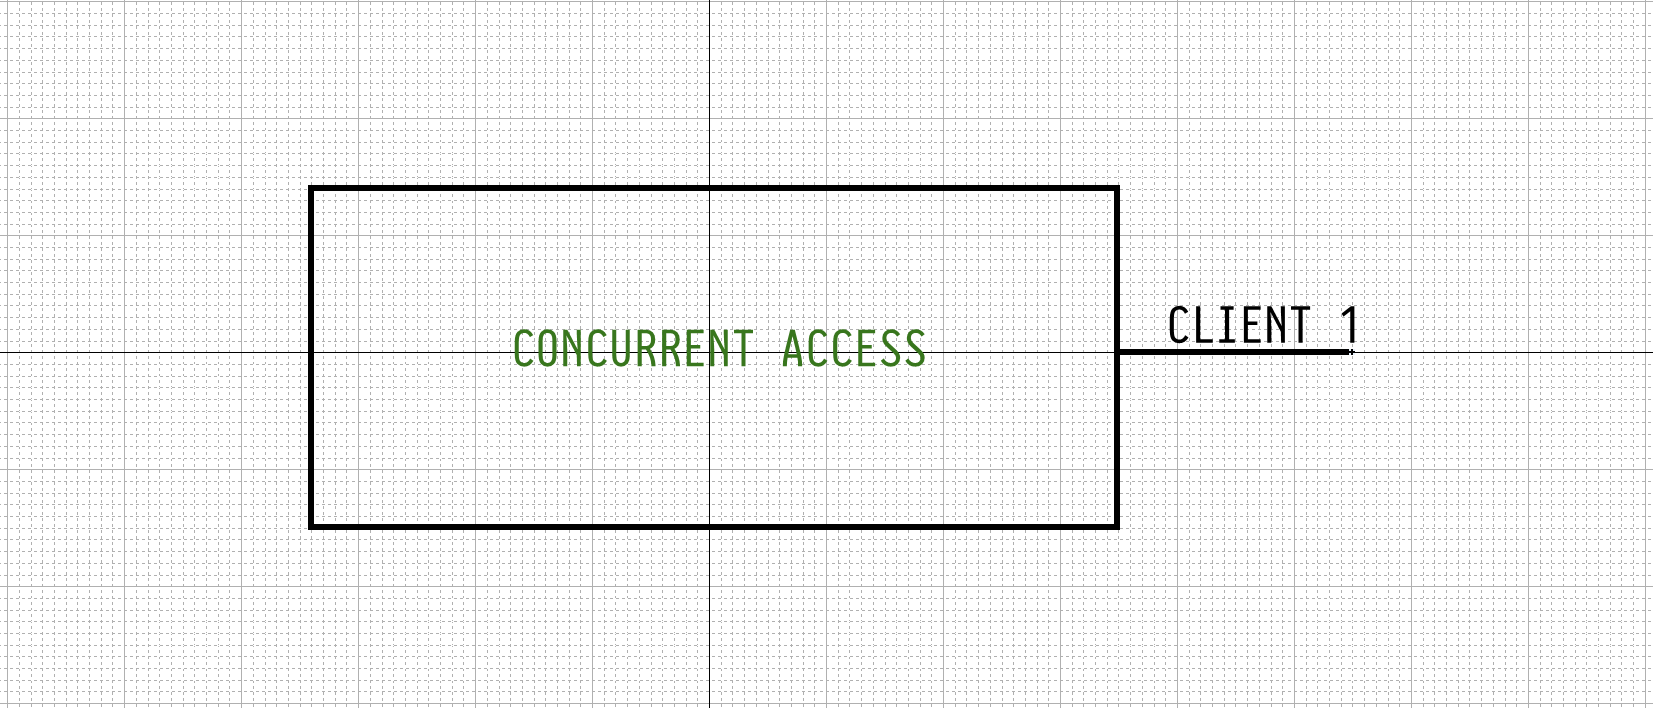 concurrent_access.PNG